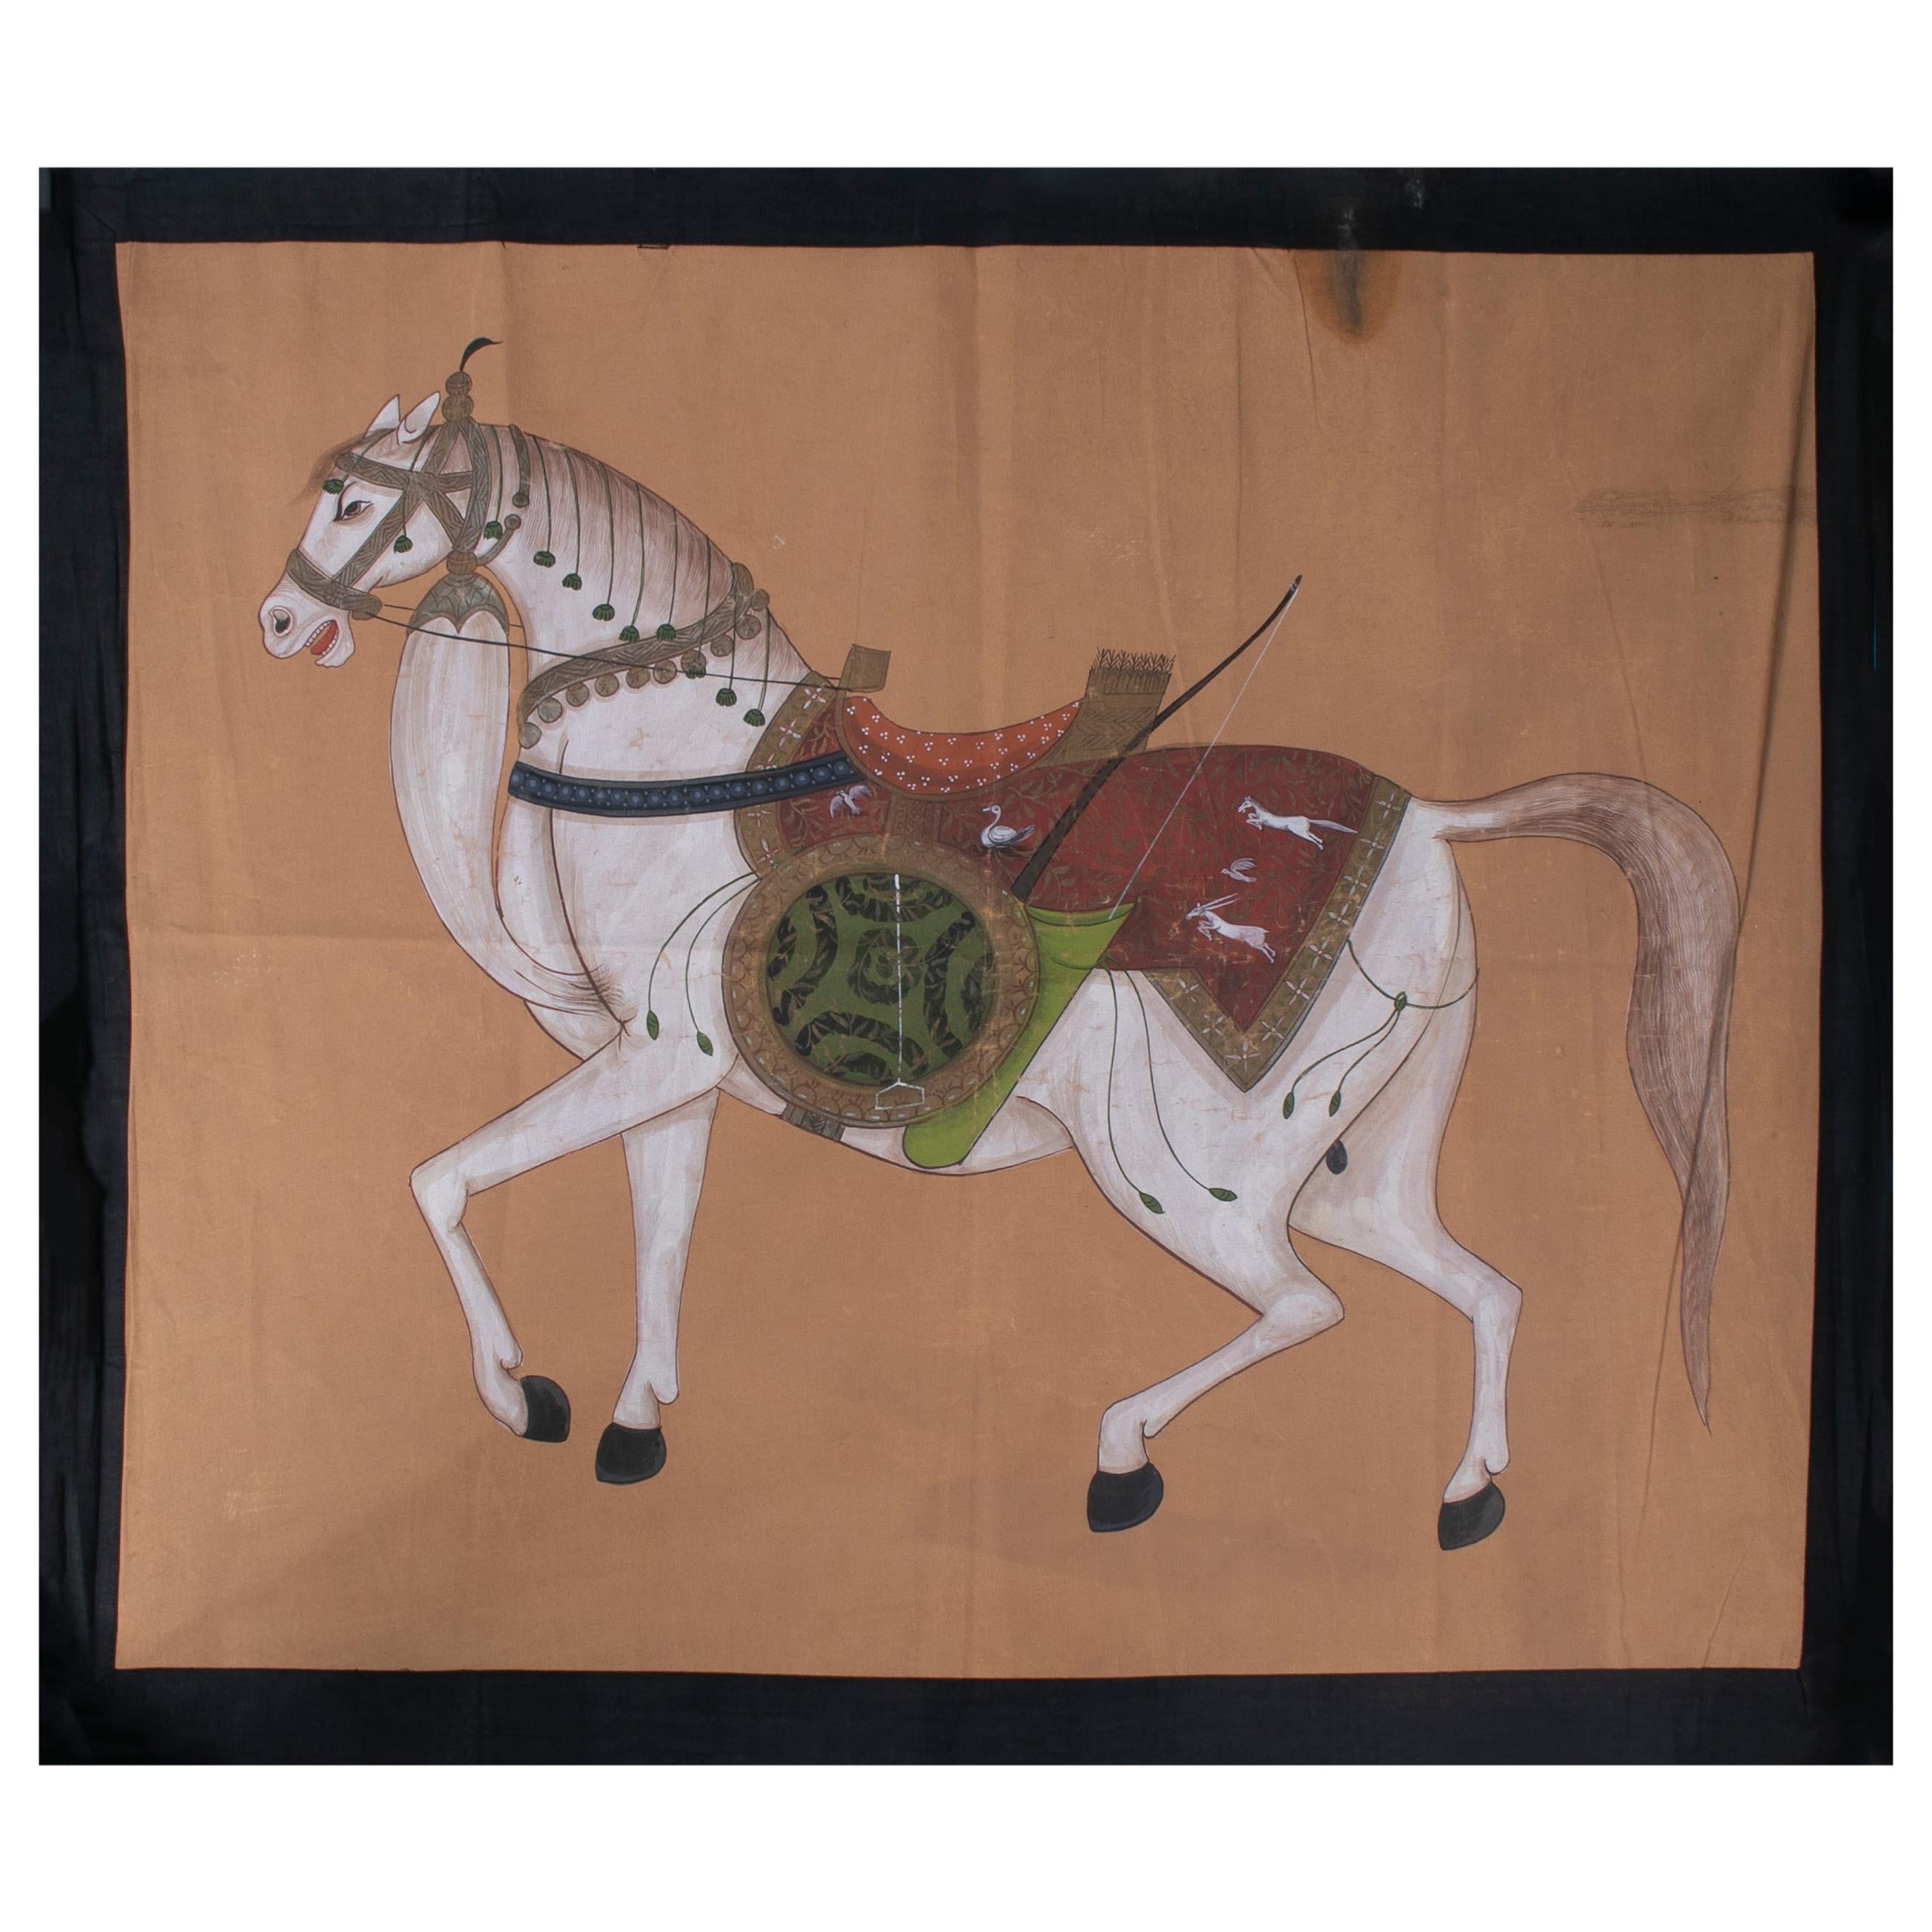 1970s Jaime Parlade Designer Hand Painting "Walking Horse" Oil on Canvas